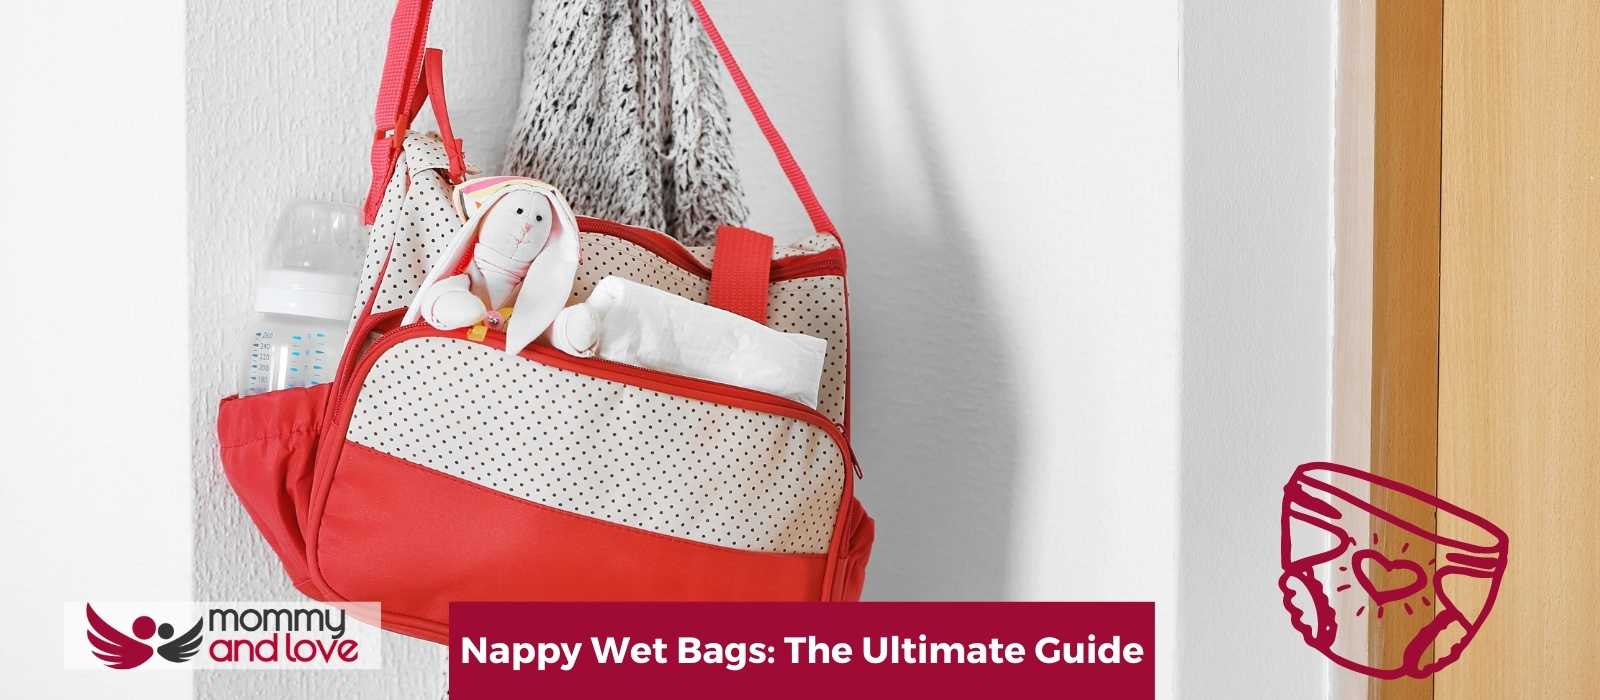 Nappy Wet Bags The Ultimate Guide